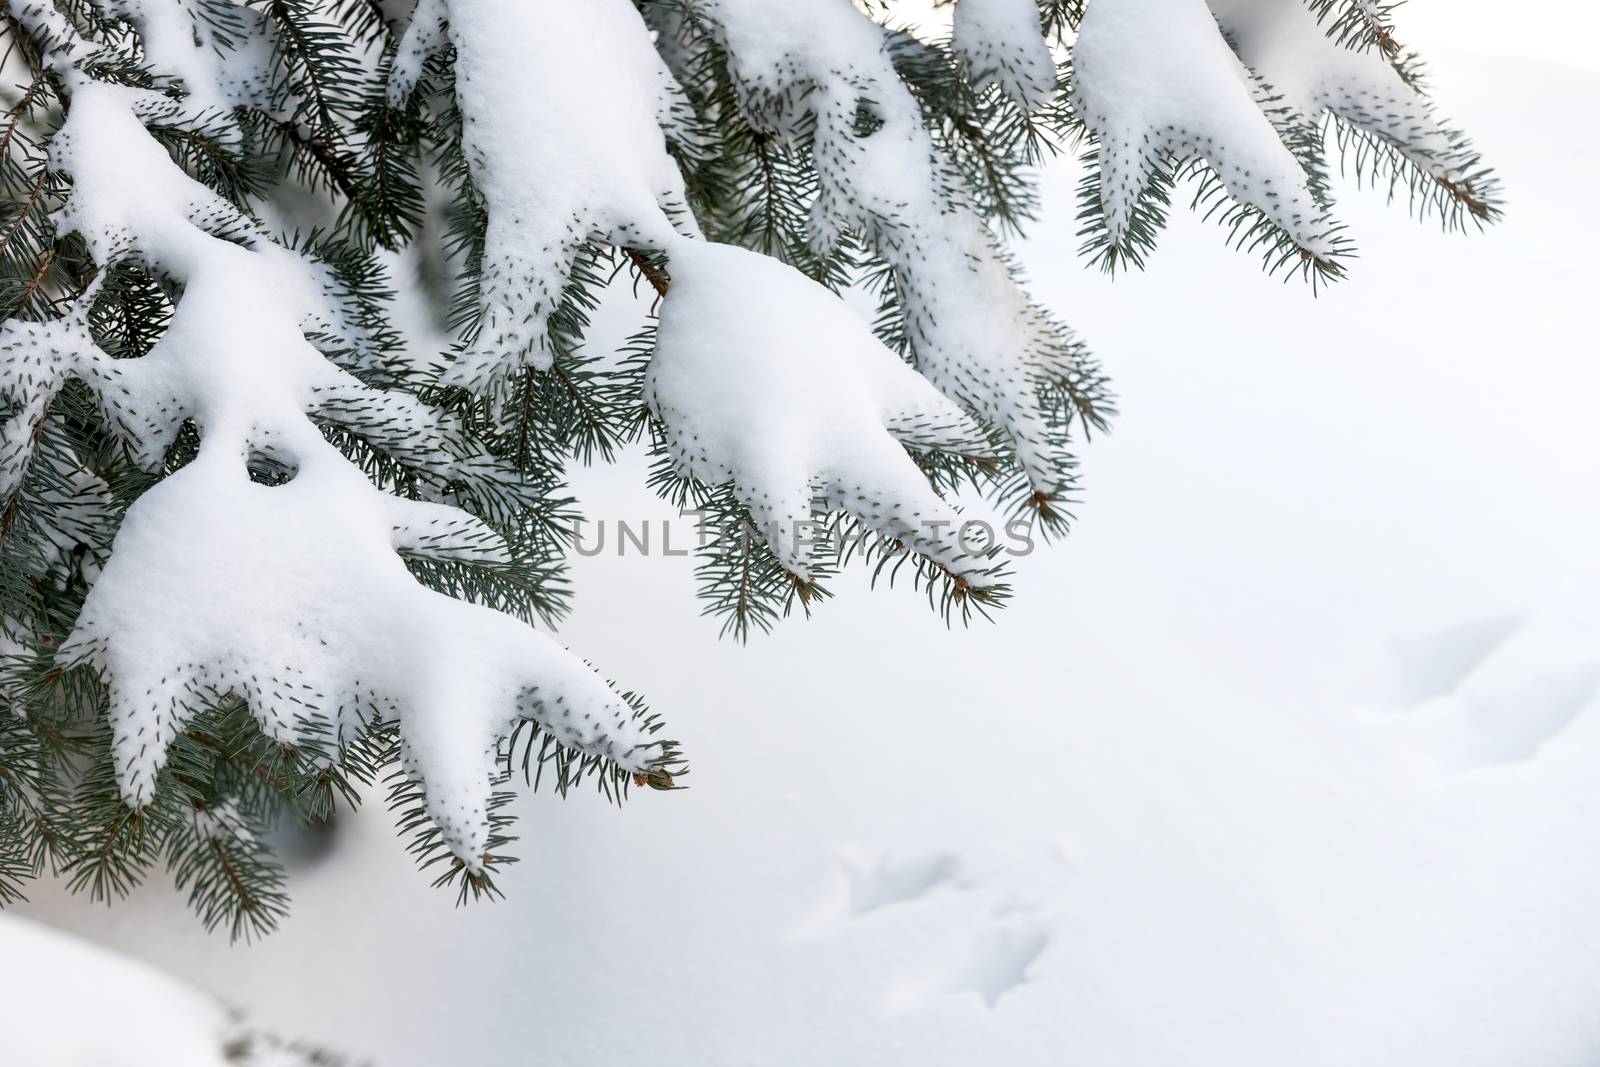 Snow on winter evergreen branches by elenathewise